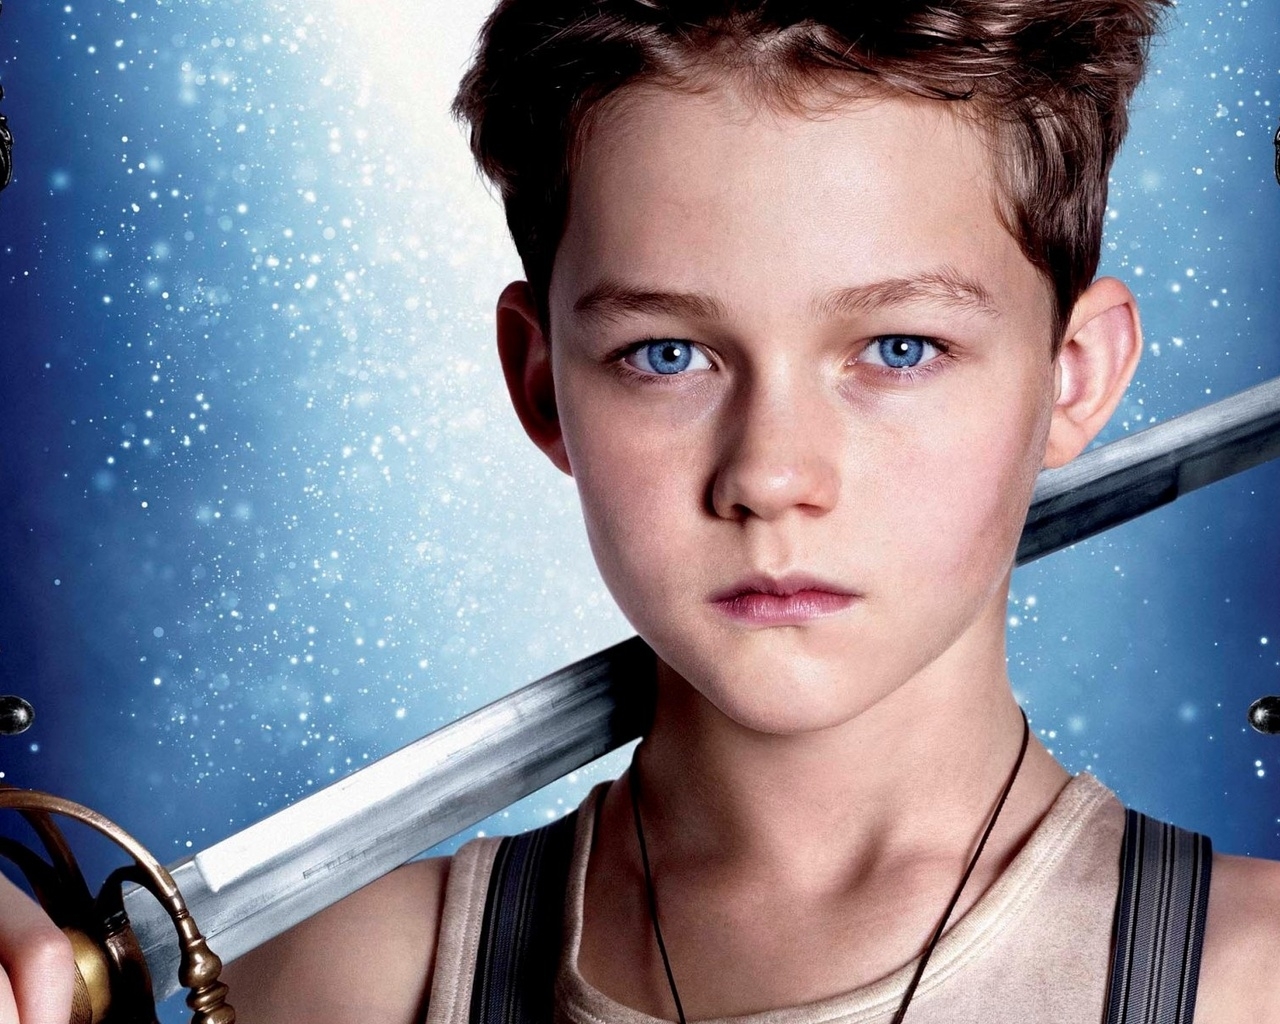 Pan Movie: Peter for 1280 x 1024 resolution